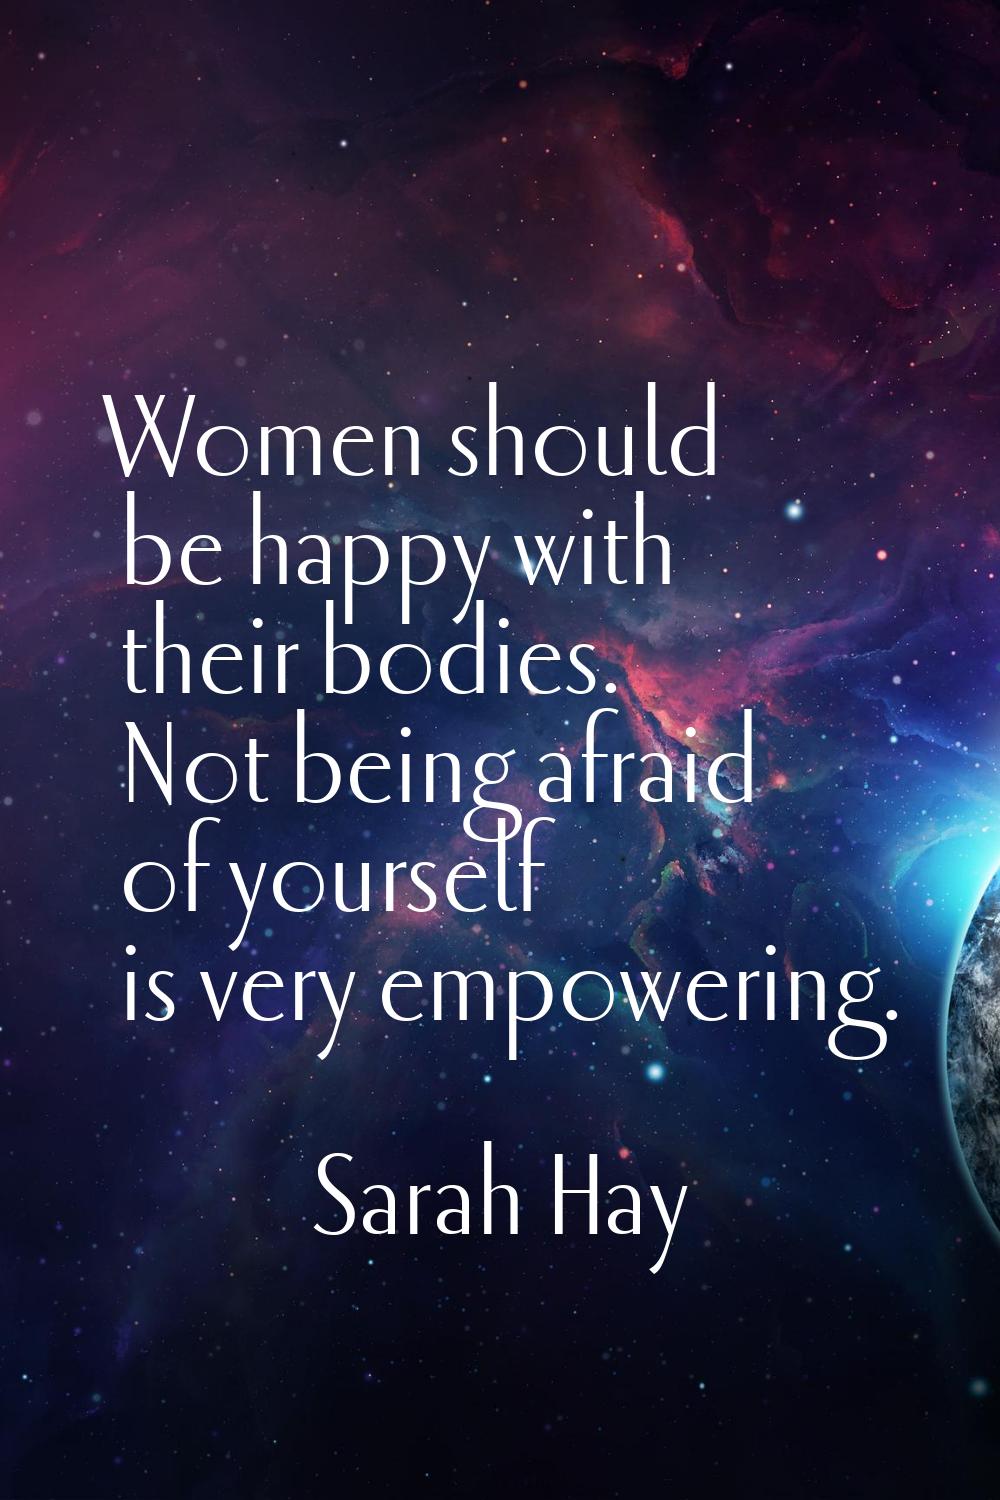 Women should be happy with their bodies. Not being afraid of yourself is very empowering.